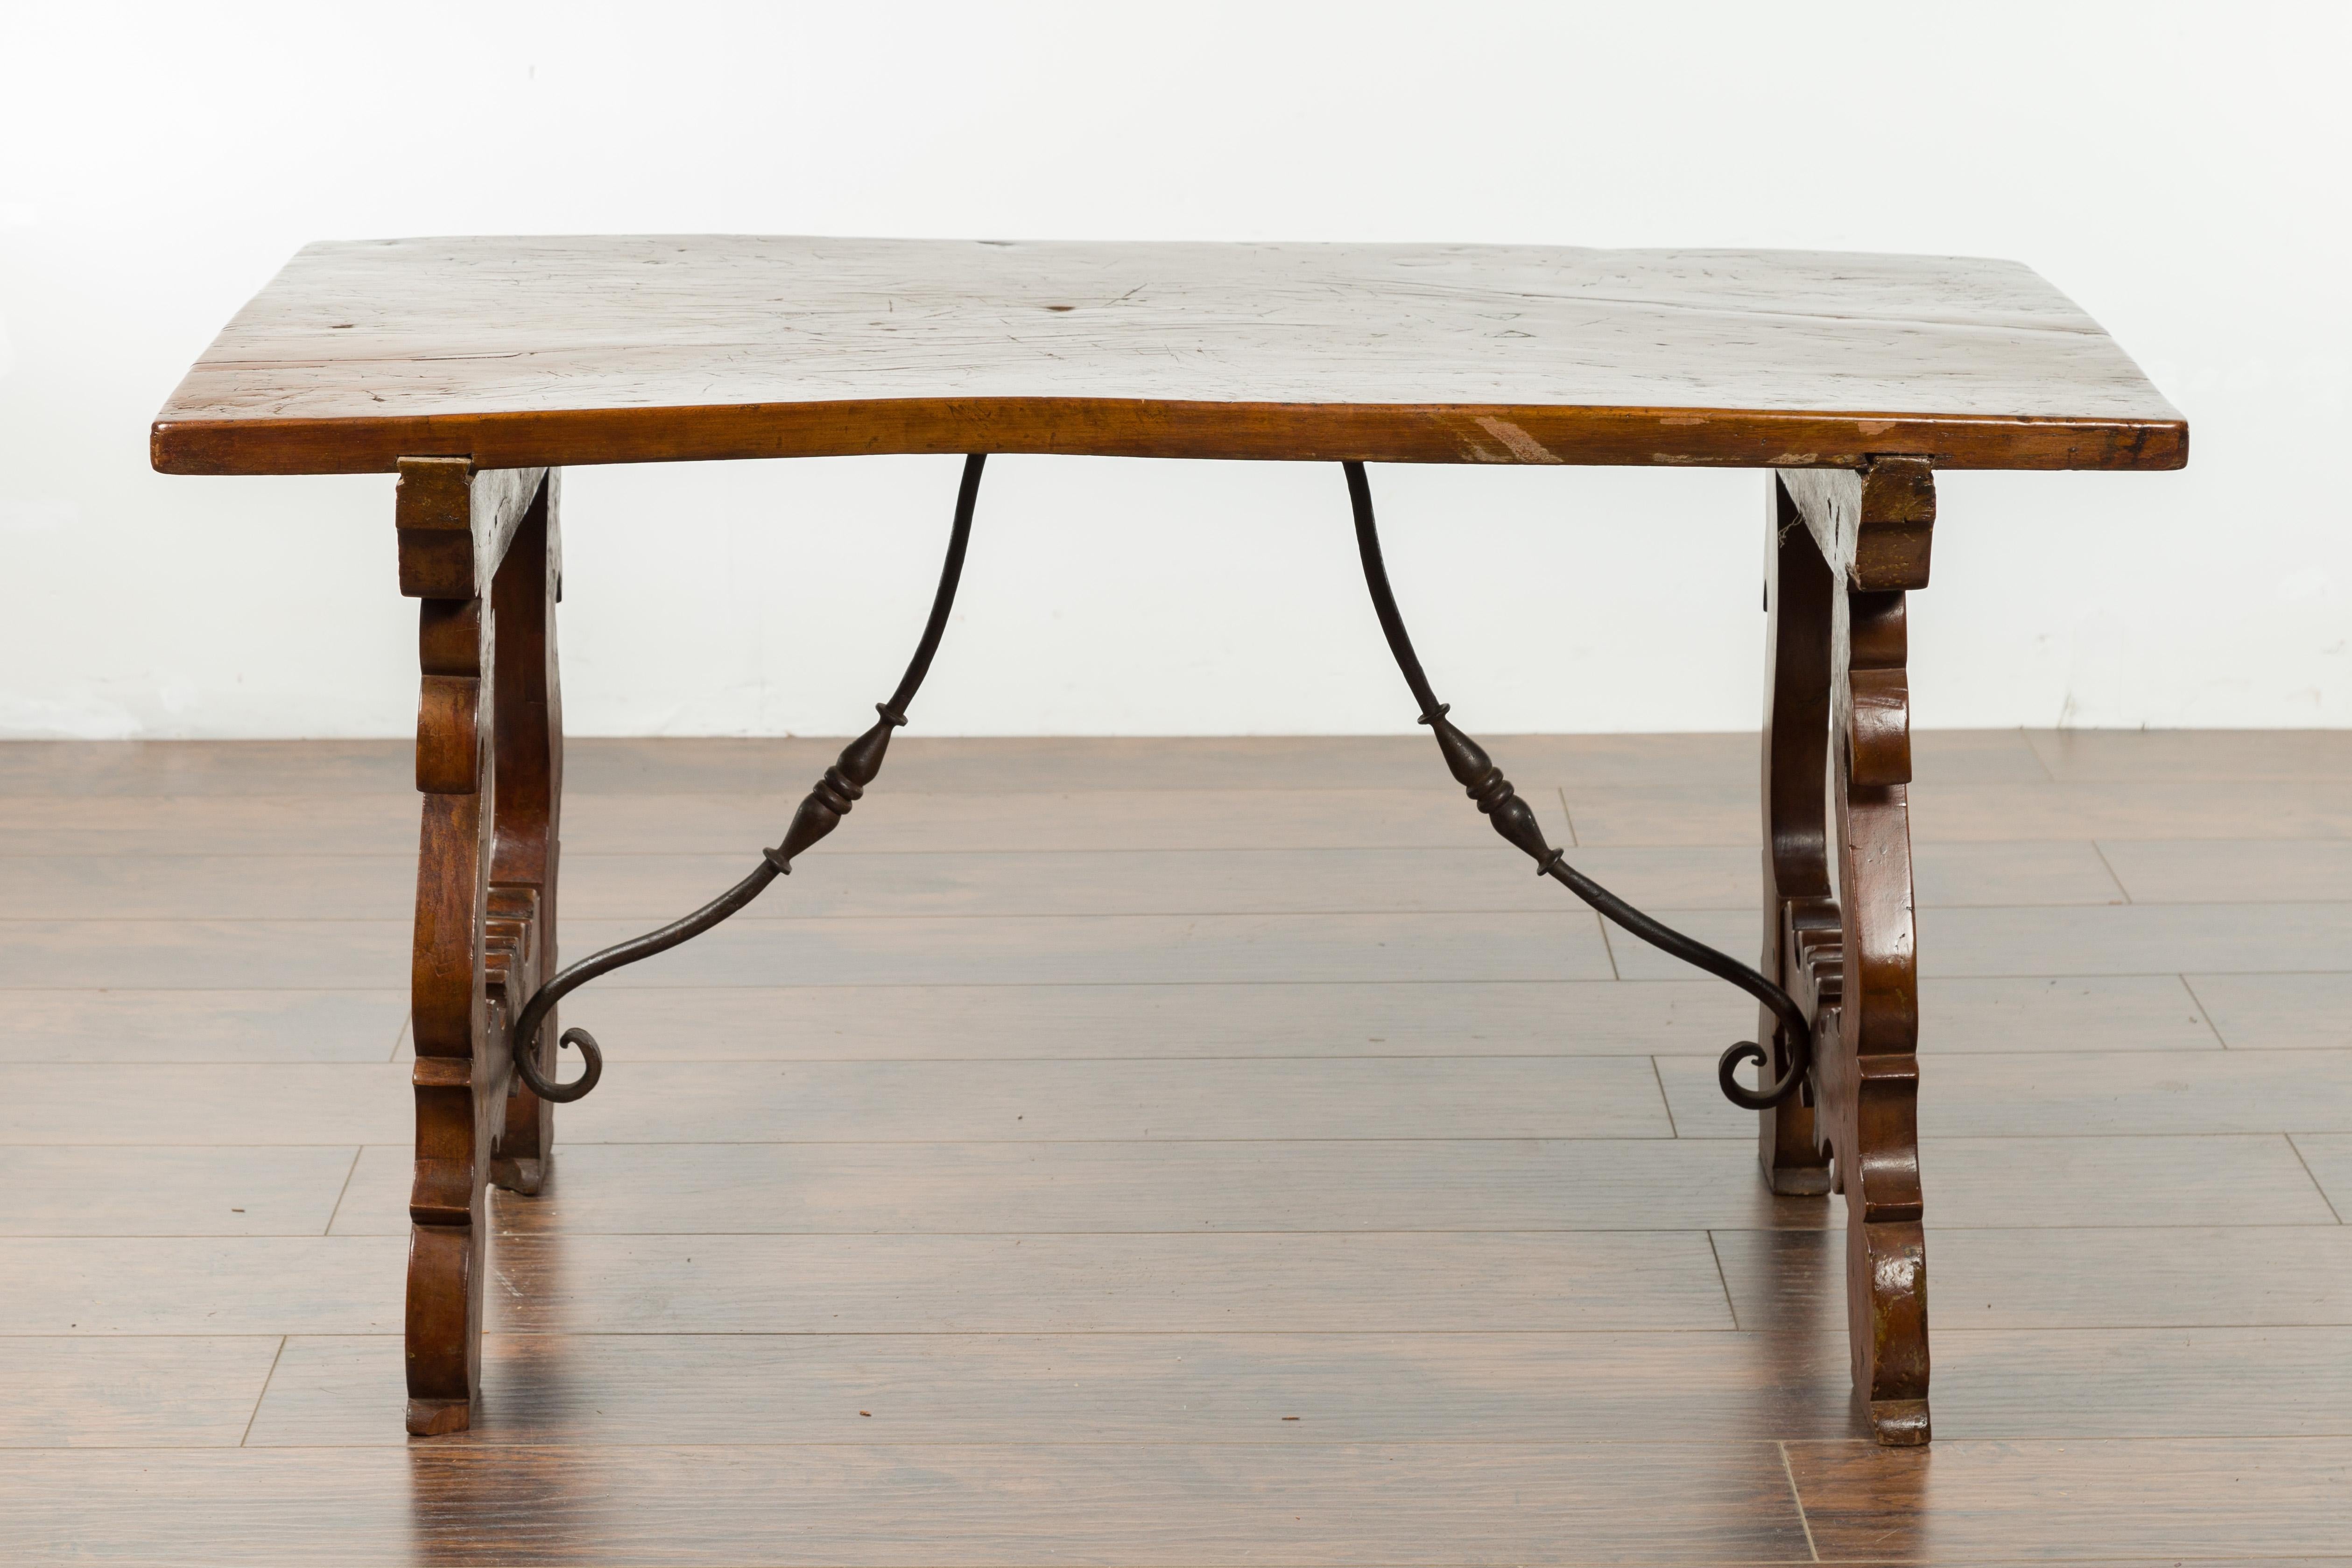 Italian 1820s Walnut Low Fratino Table with Lyre-Shaped Base and Iron Stretchers For Sale 8